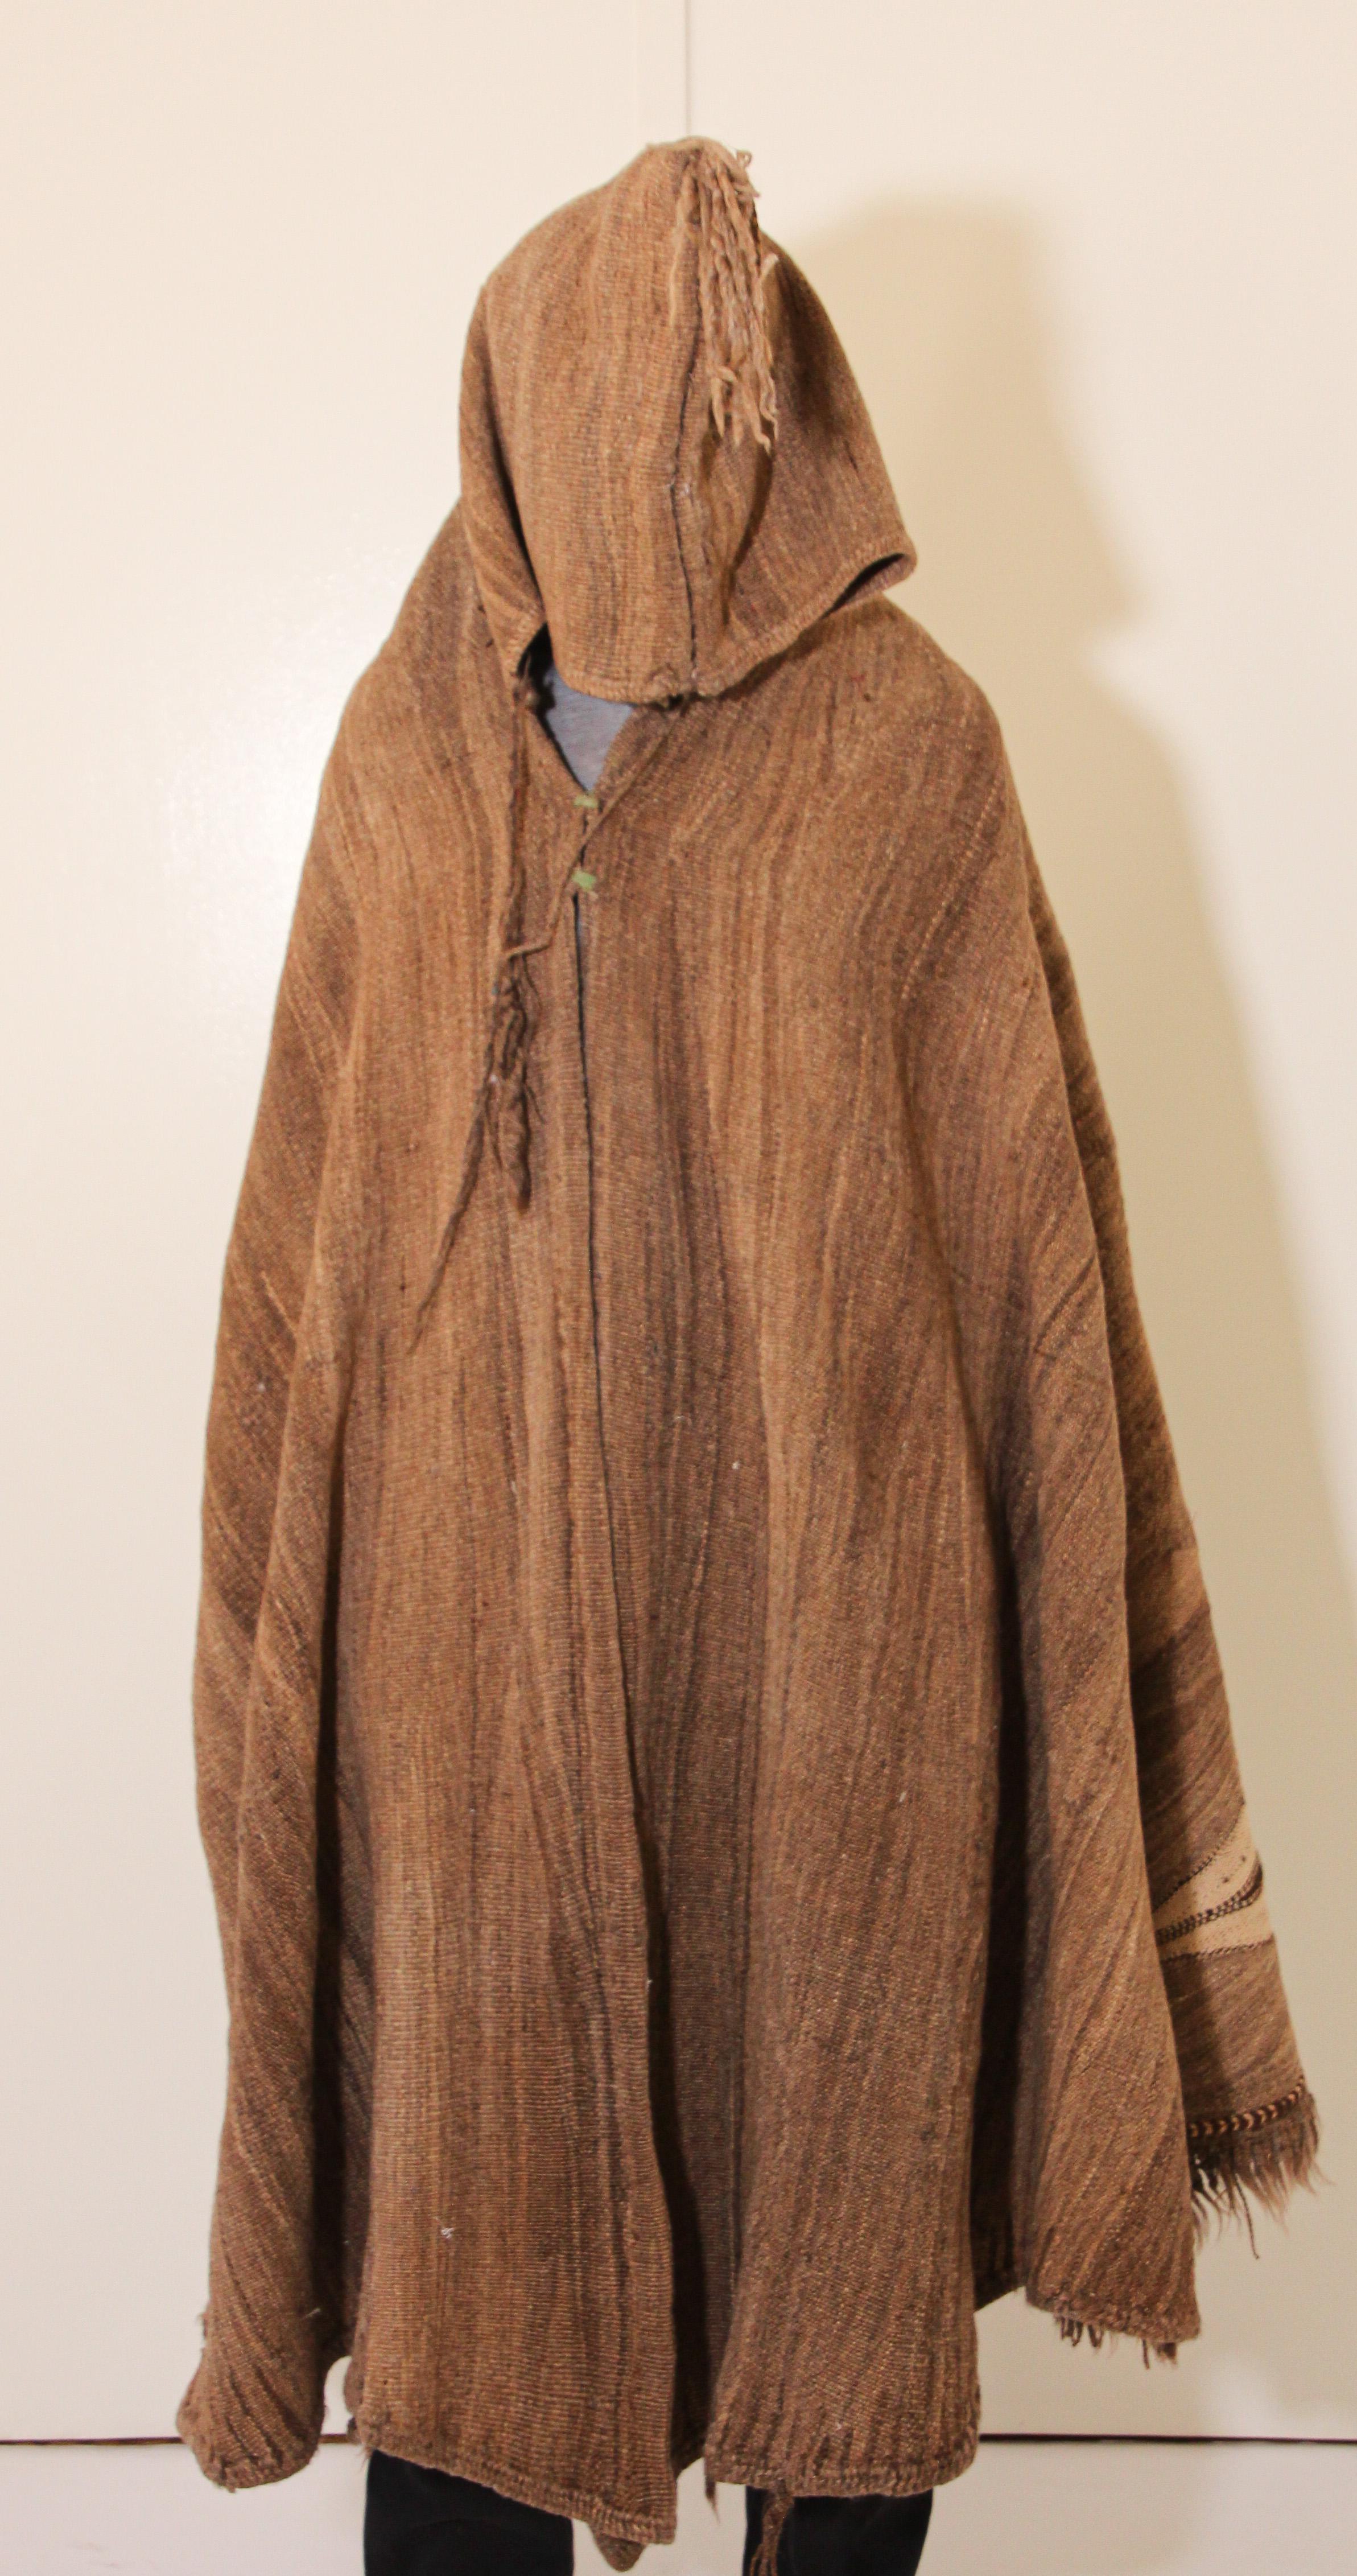 Berber Tribal North Africa Moroccan Burnous Wool Cape In Good Condition For Sale In North Hollywood, CA